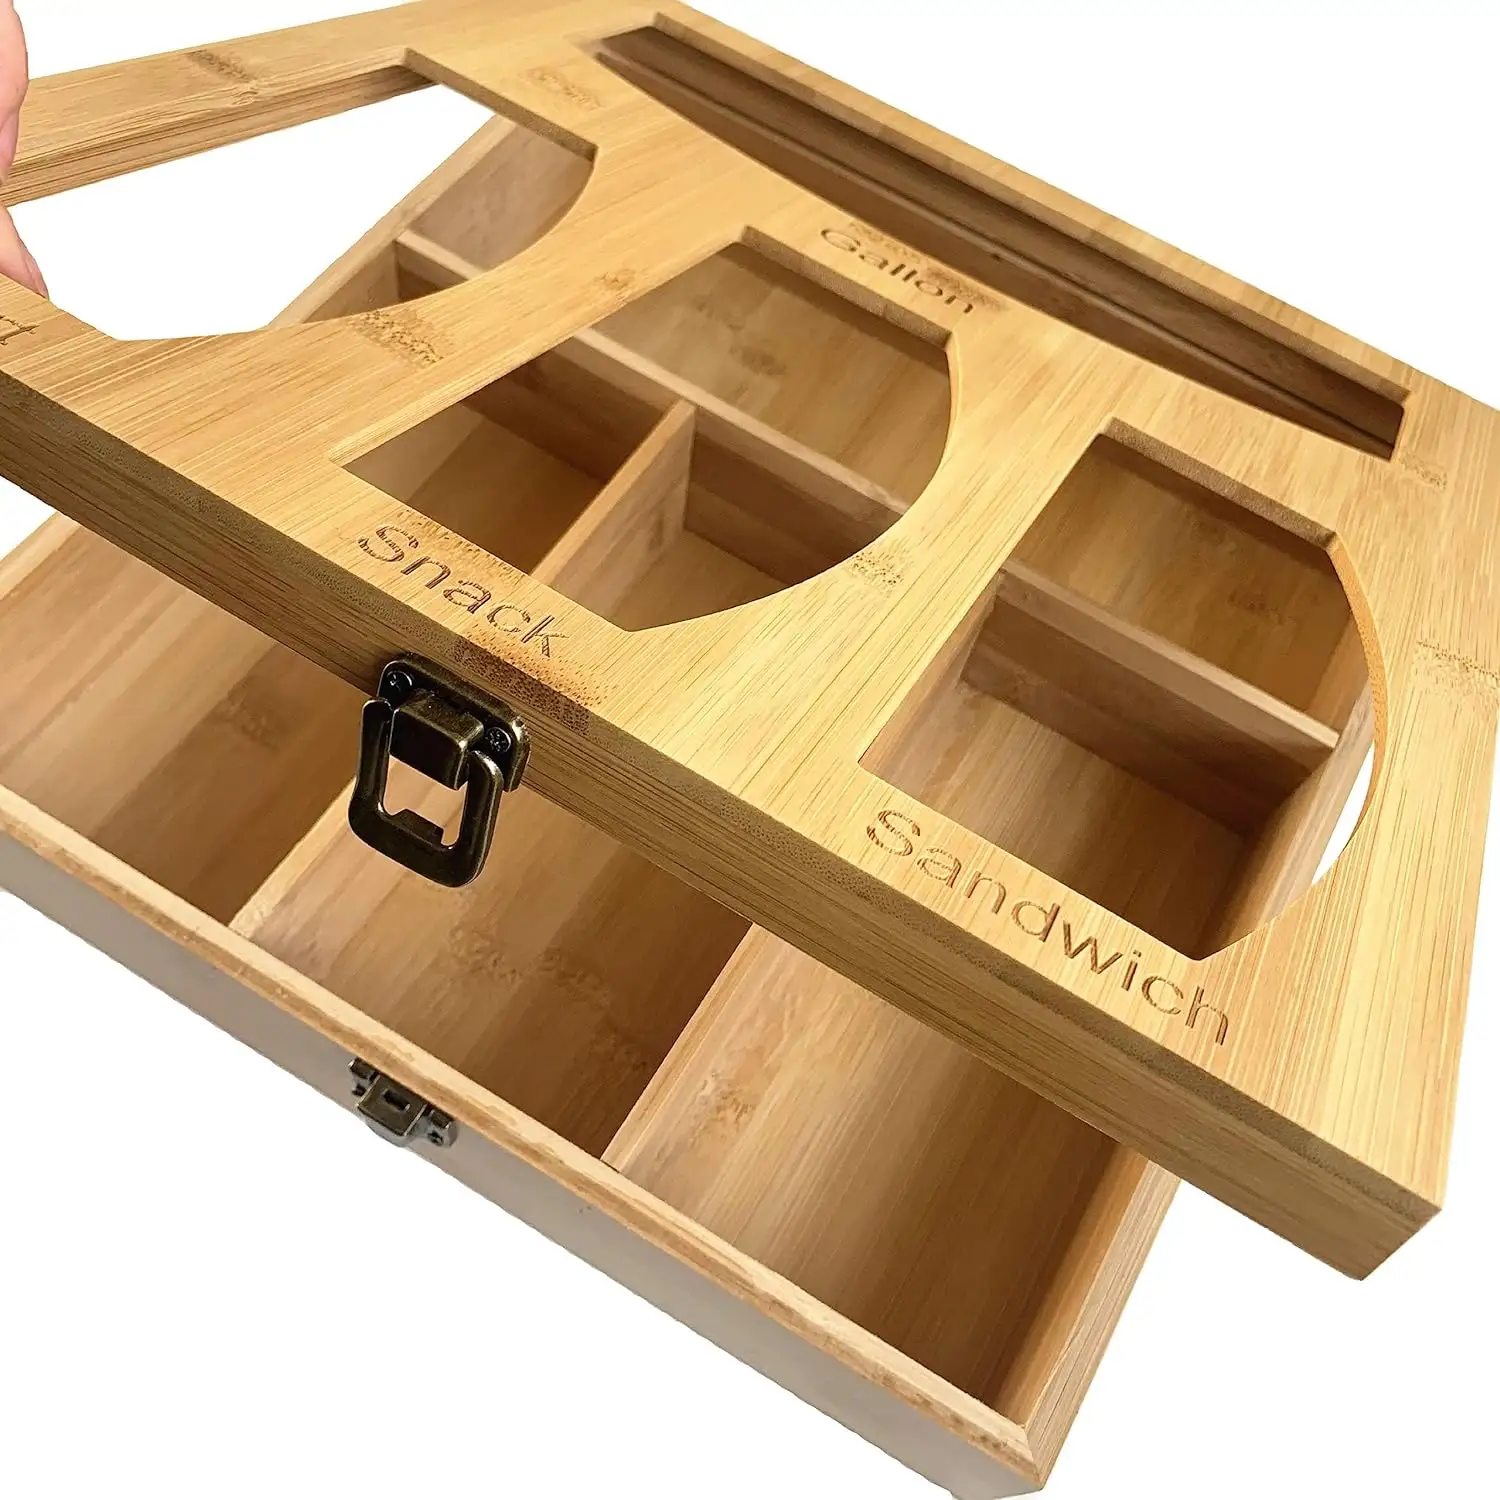 4-in-1 bamboo kitchen drawer organizer for zipper bags compatible with gallon  sandwich and snack storage sizes